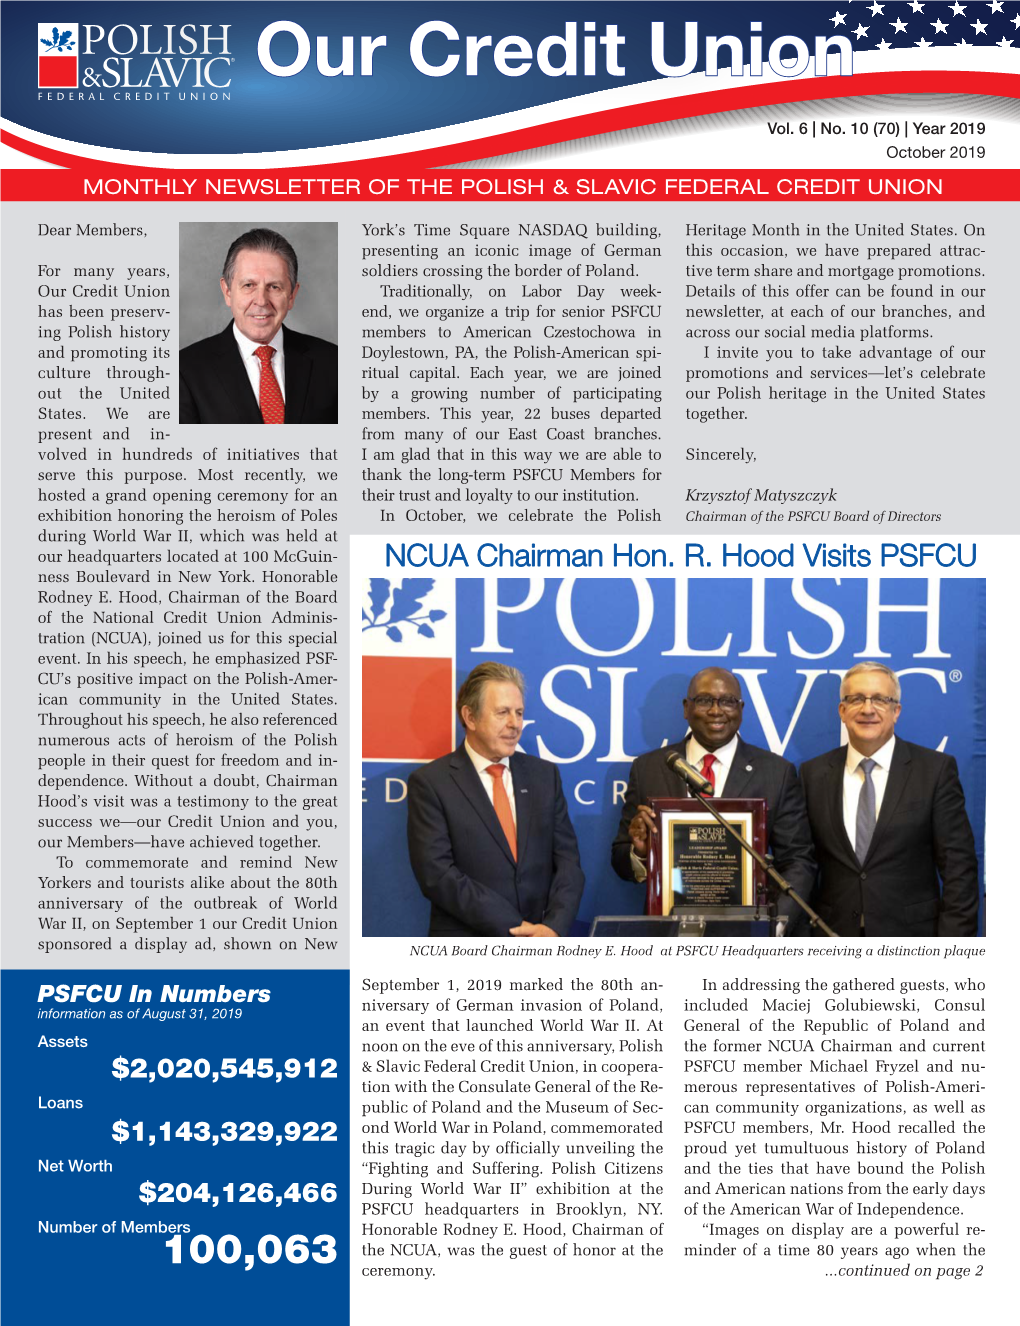 October 2019 MONTHLY NEWSLETTER of the POLISH & SLAVIC FEDERAL CREDIT UNION